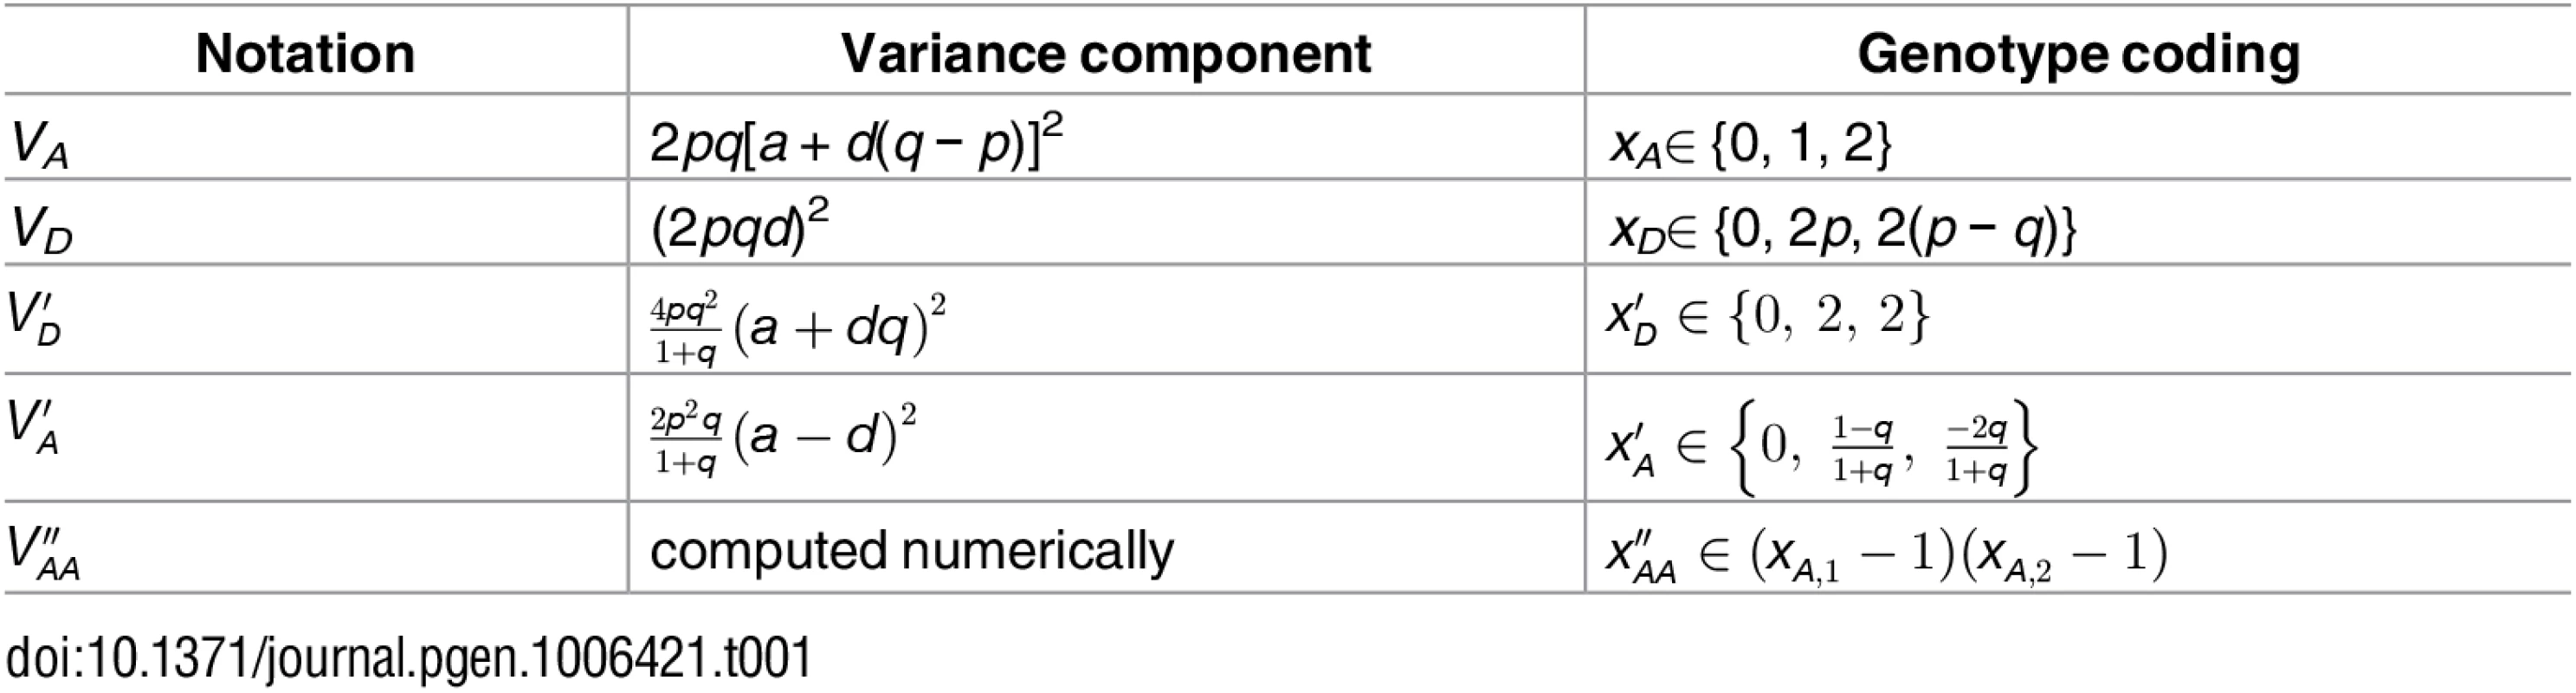 Notations and definitions of variance components in this study.